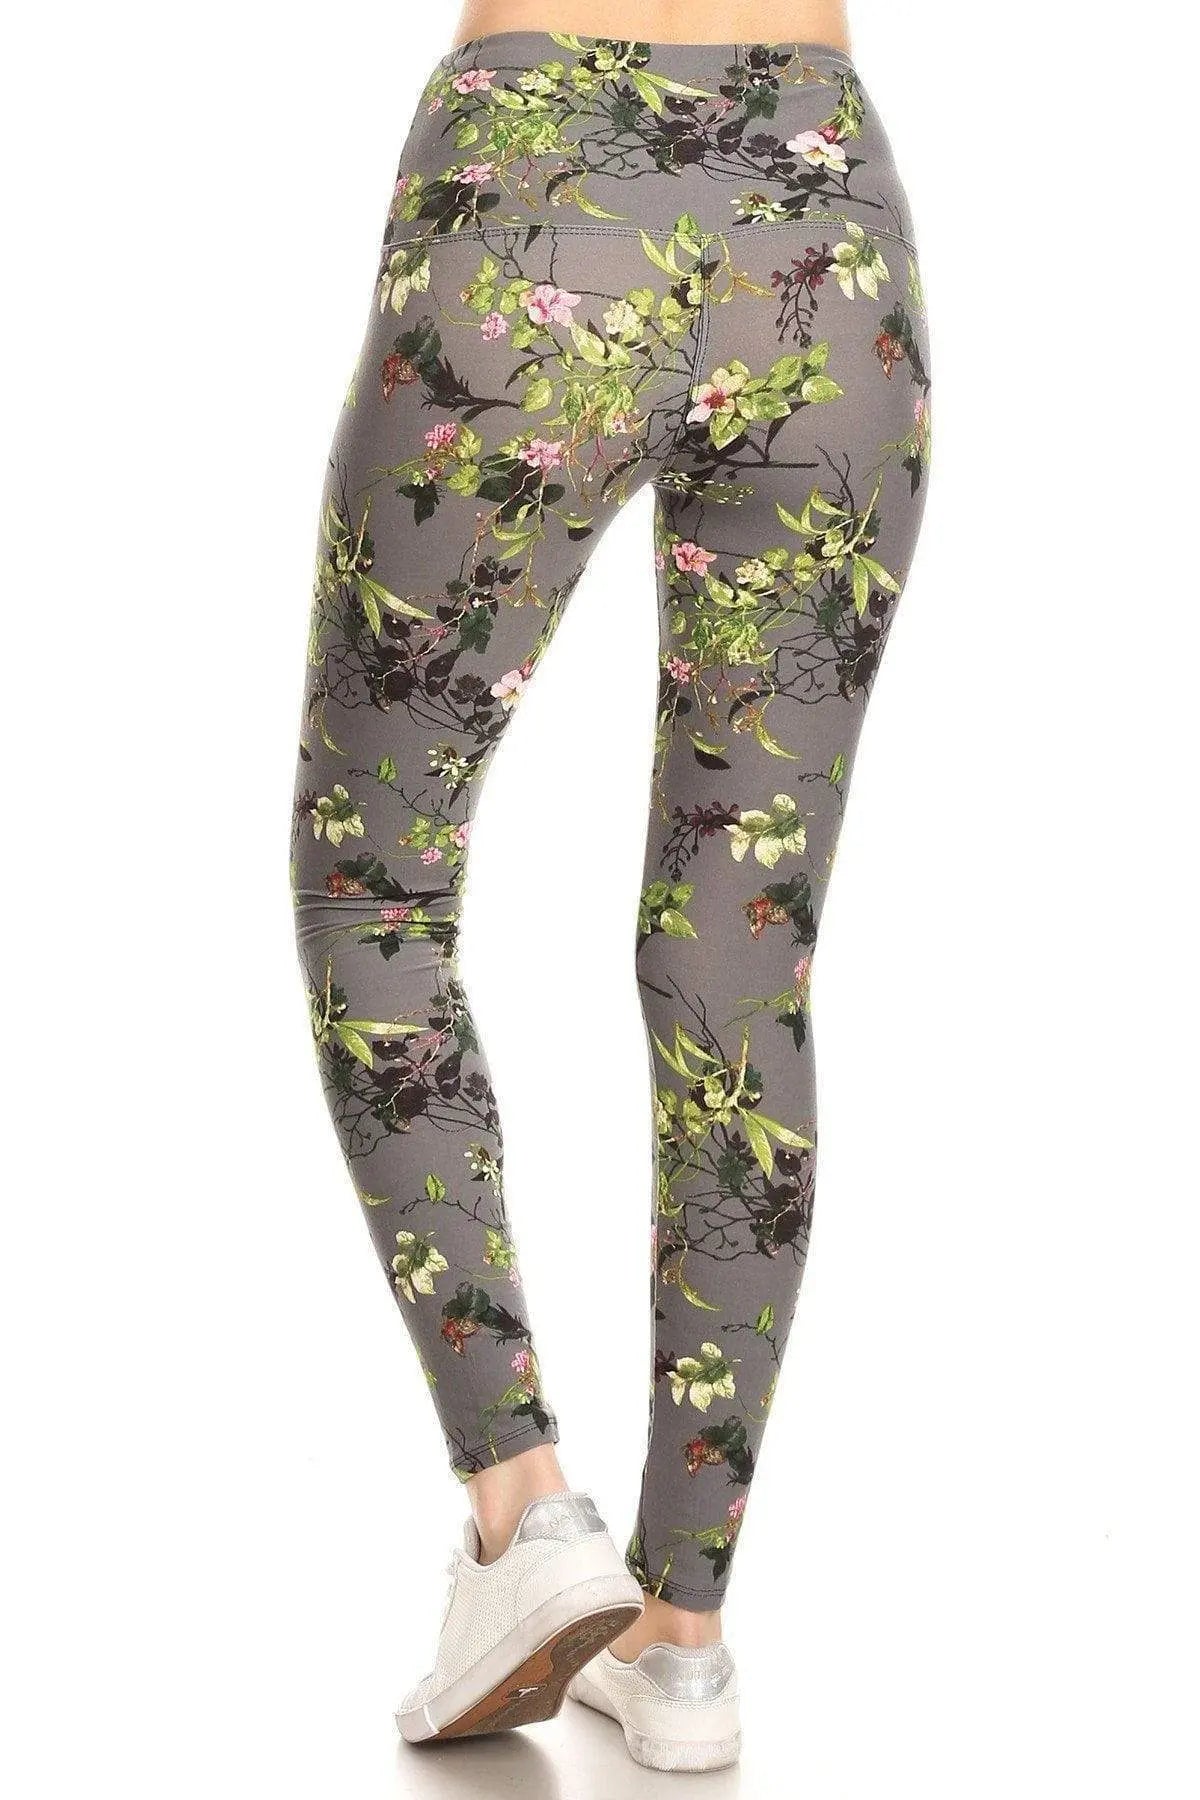 5-inch Long Yoga Style Banded Lined Floral Printed Knit Legging With High Waist Blue Zone Planet